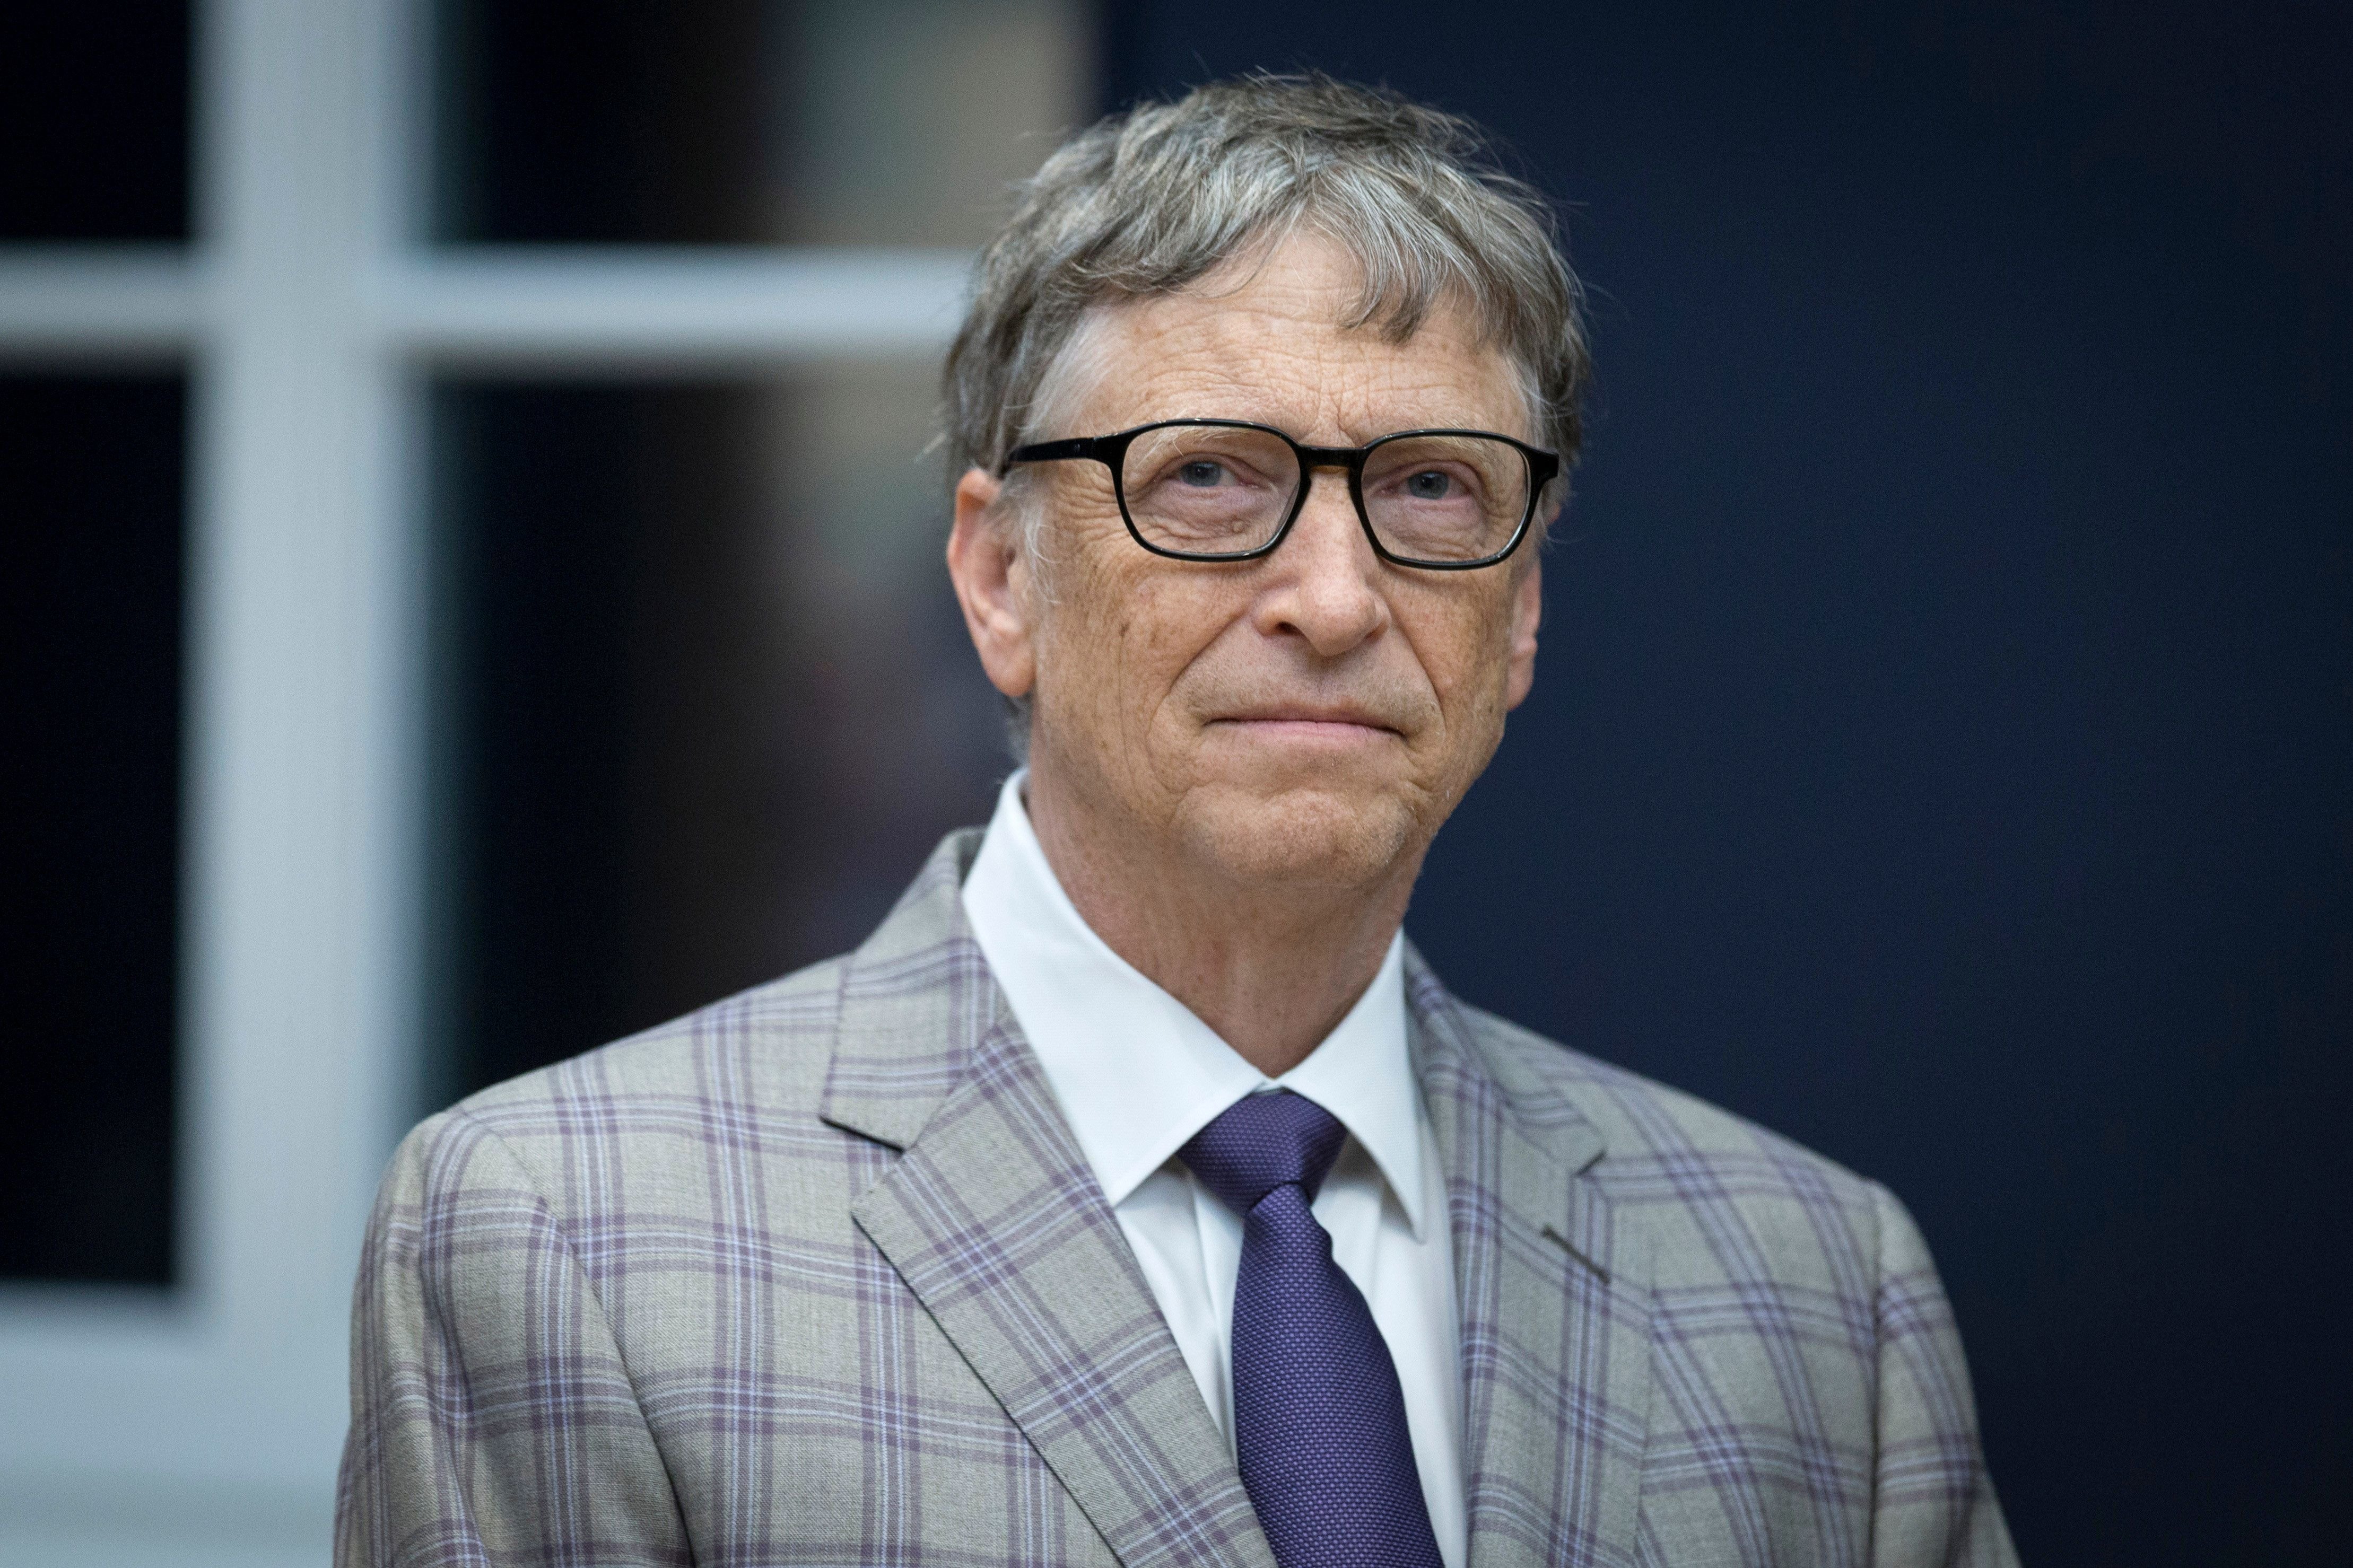 Bill Gates at the opening of the Barberini Museum on January 20, 2017 in Potsdam. | Photo: Getty Images